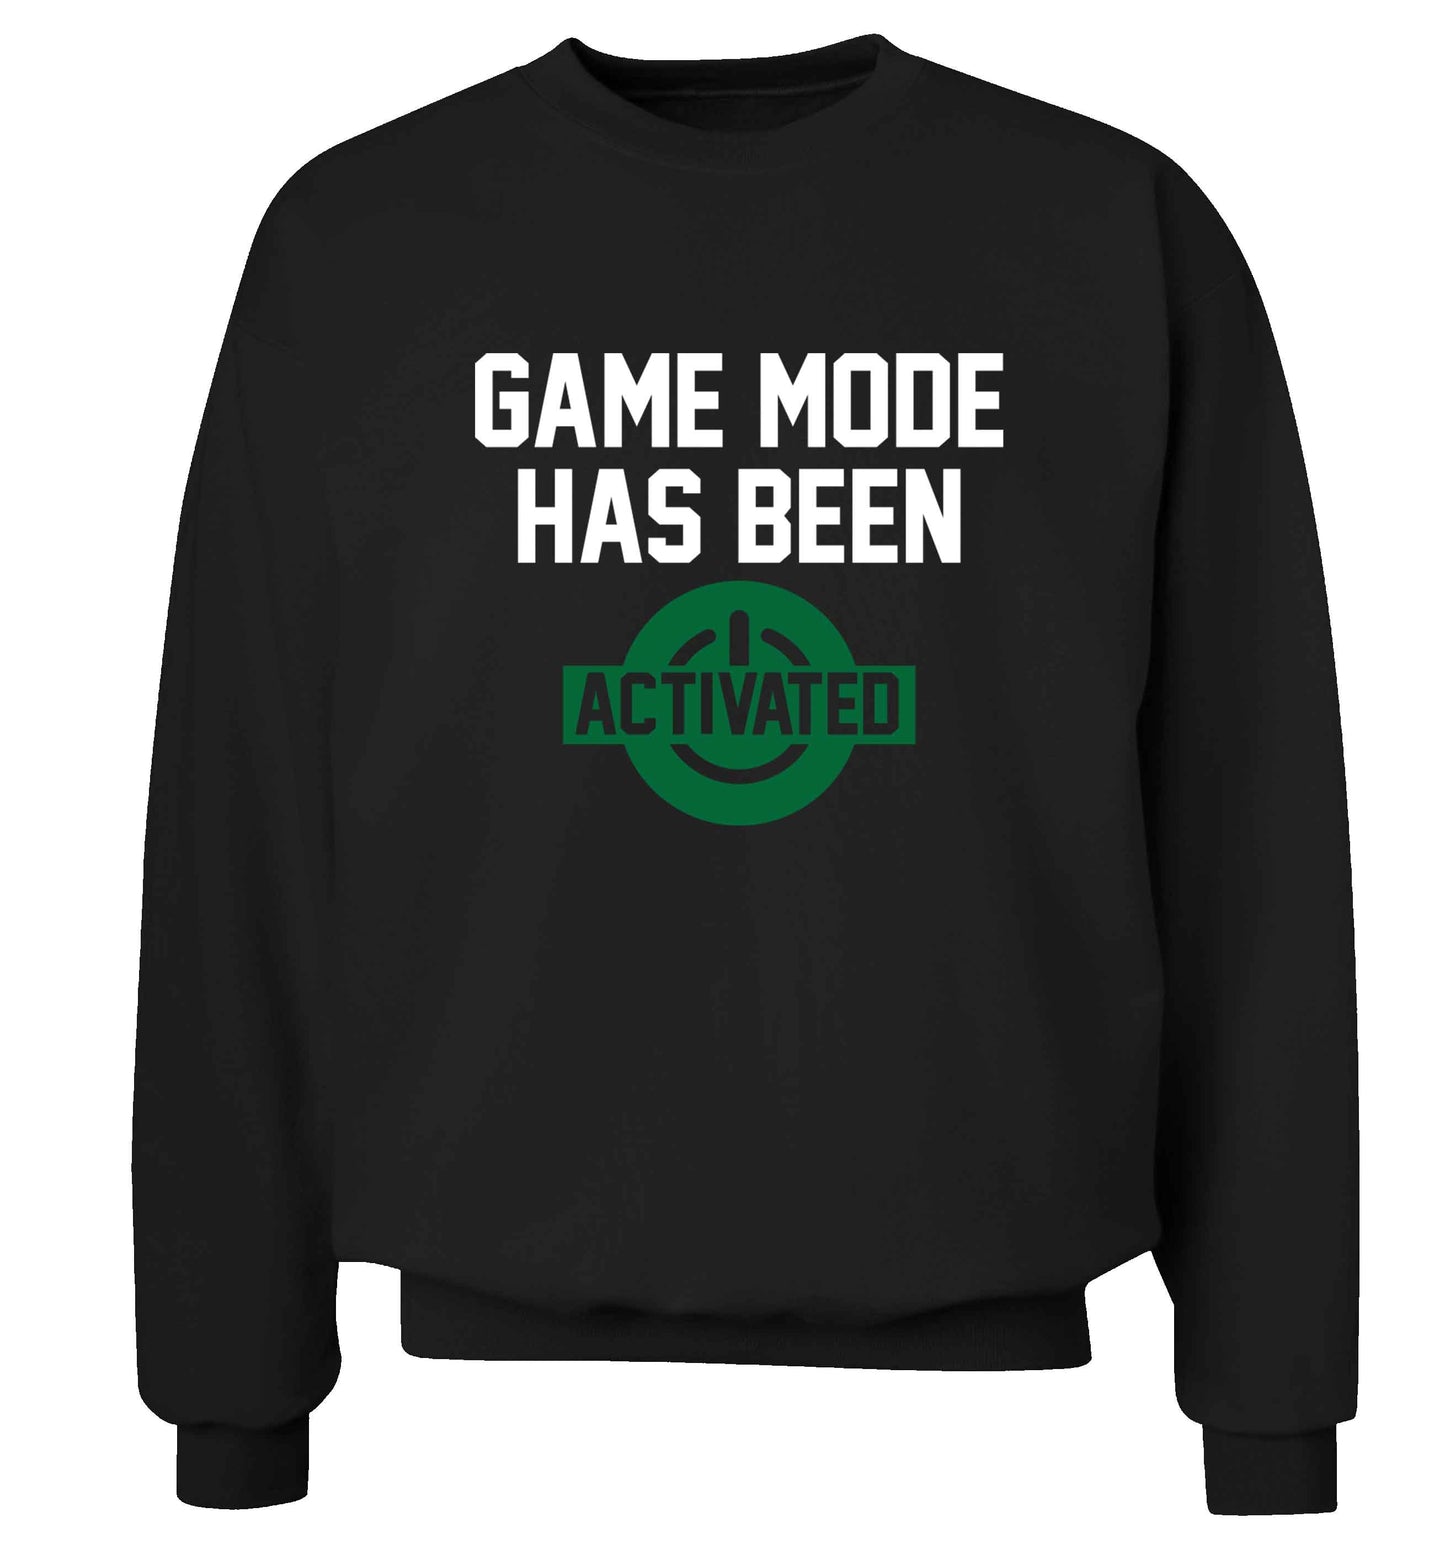 Game mode has been activated adult's unisex black sweater 2XL